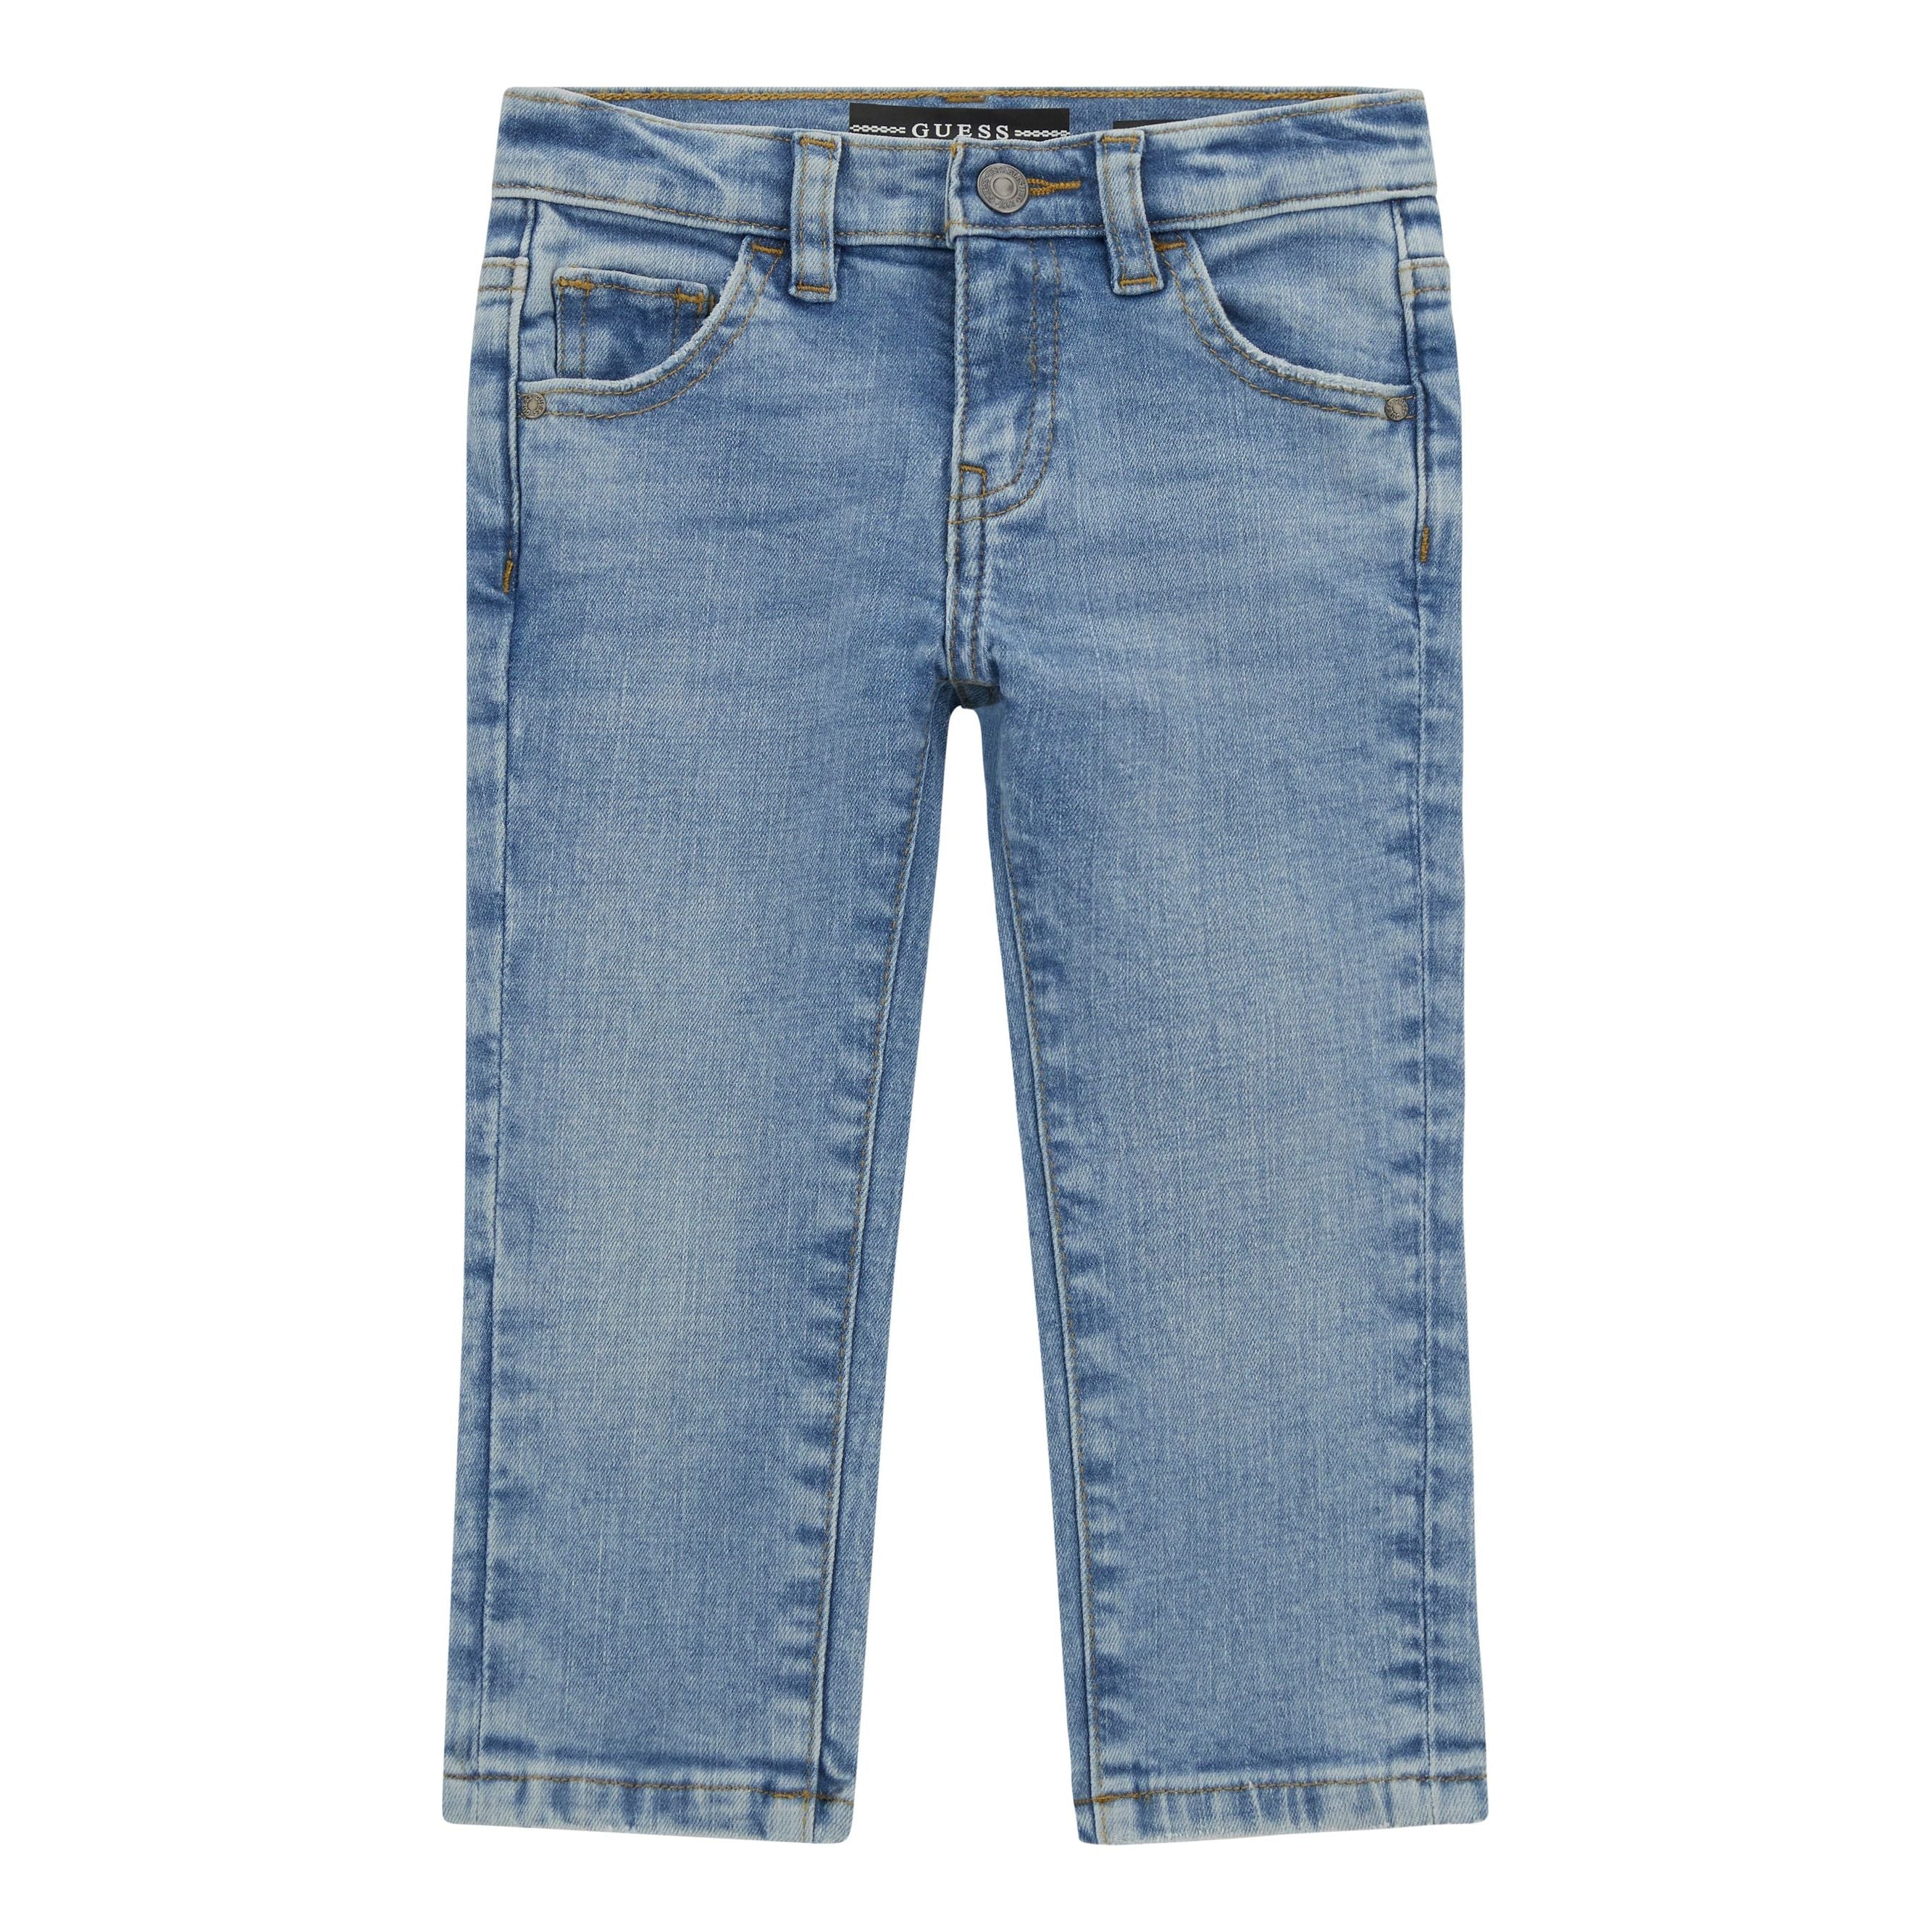 Guess - Toddler Boys Slim Fit Jean in Lapis Blue